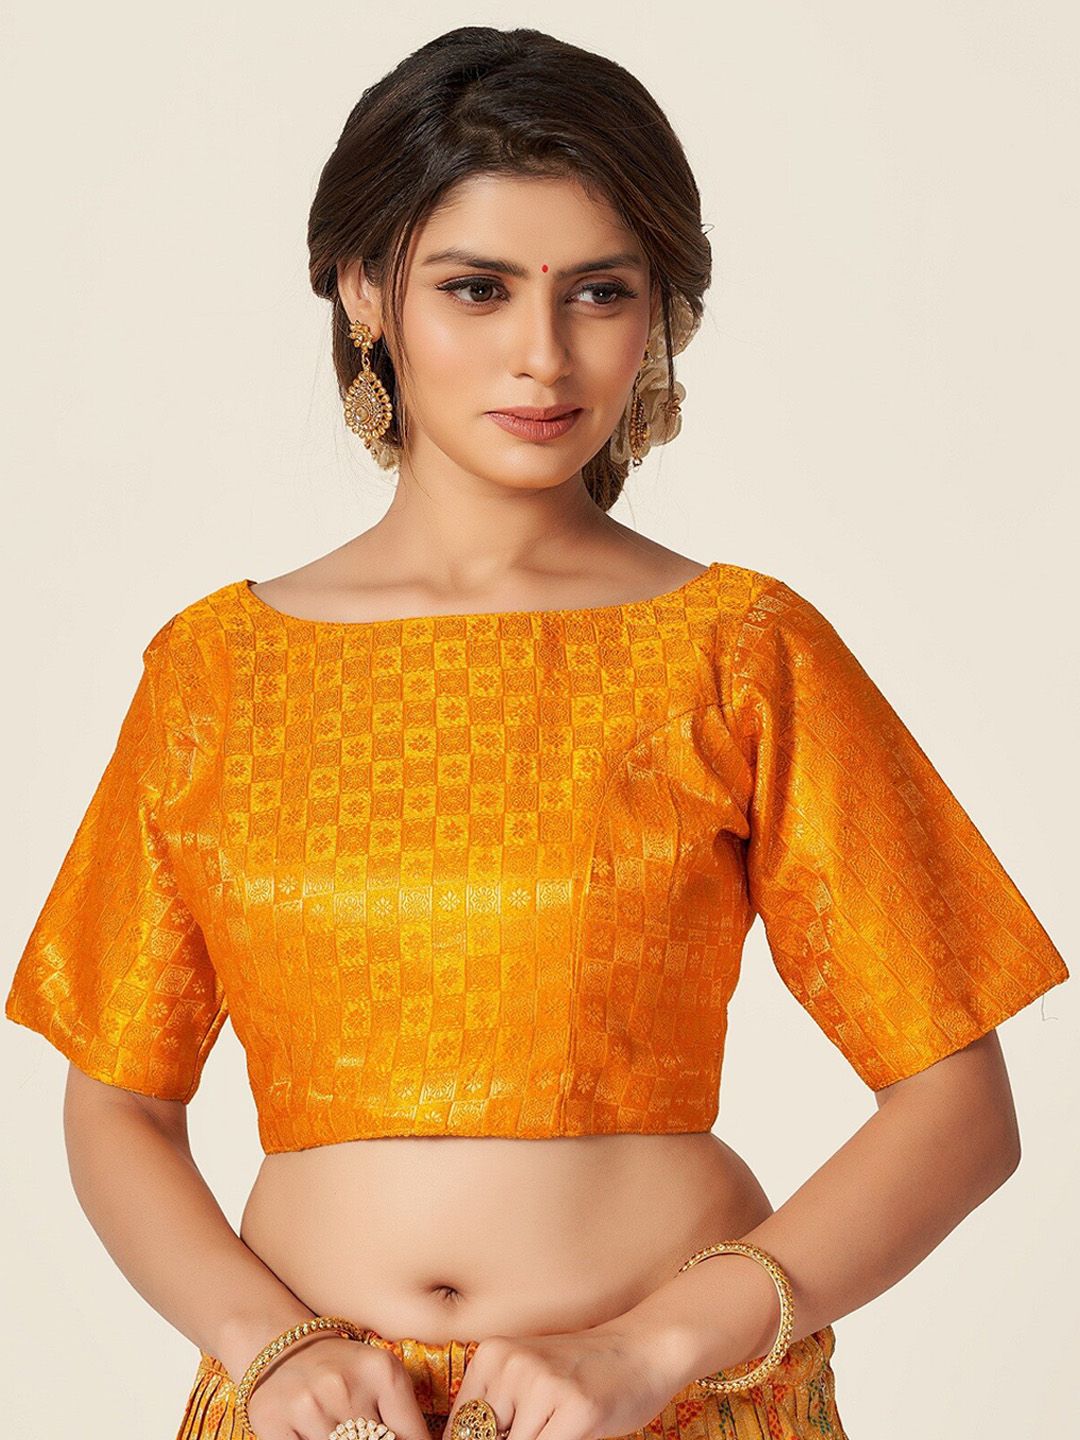 HIMRISE Women Yellow Woven Design Saree Blouse Price in India